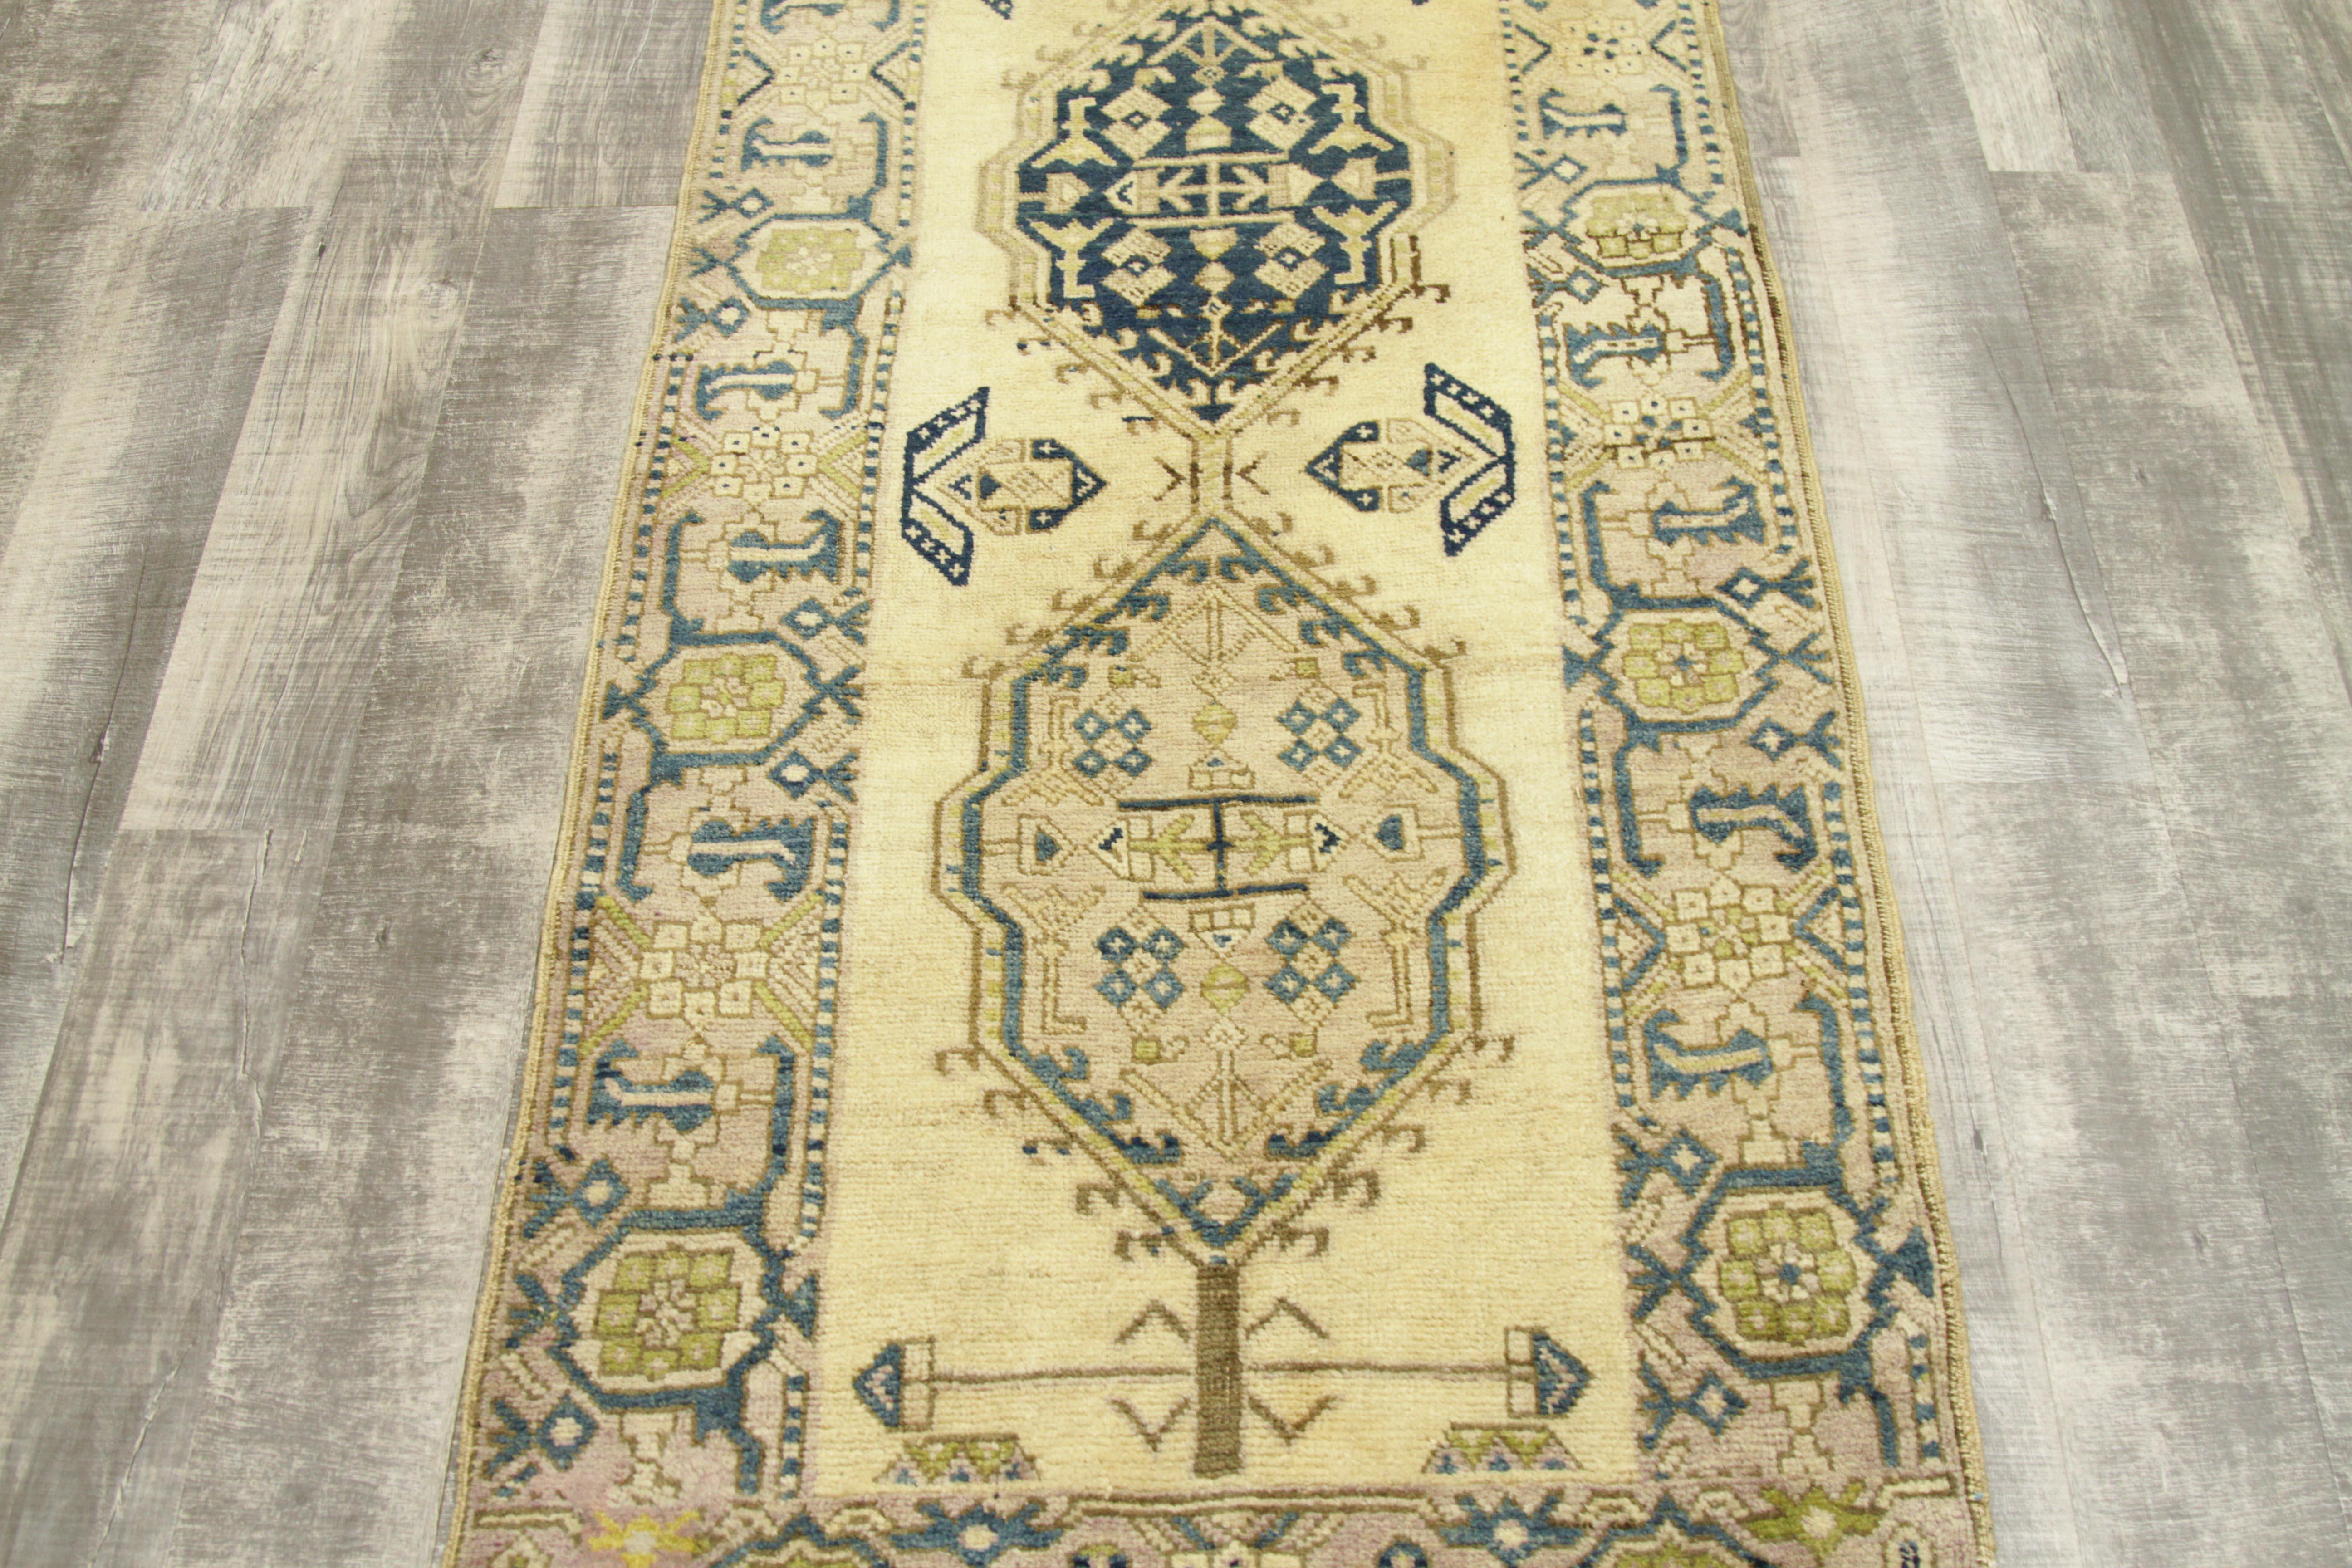 Early 20th Century Antique Persian Rug Sarab Design with Camel Hair Tribal Patterns, circa 1910s For Sale